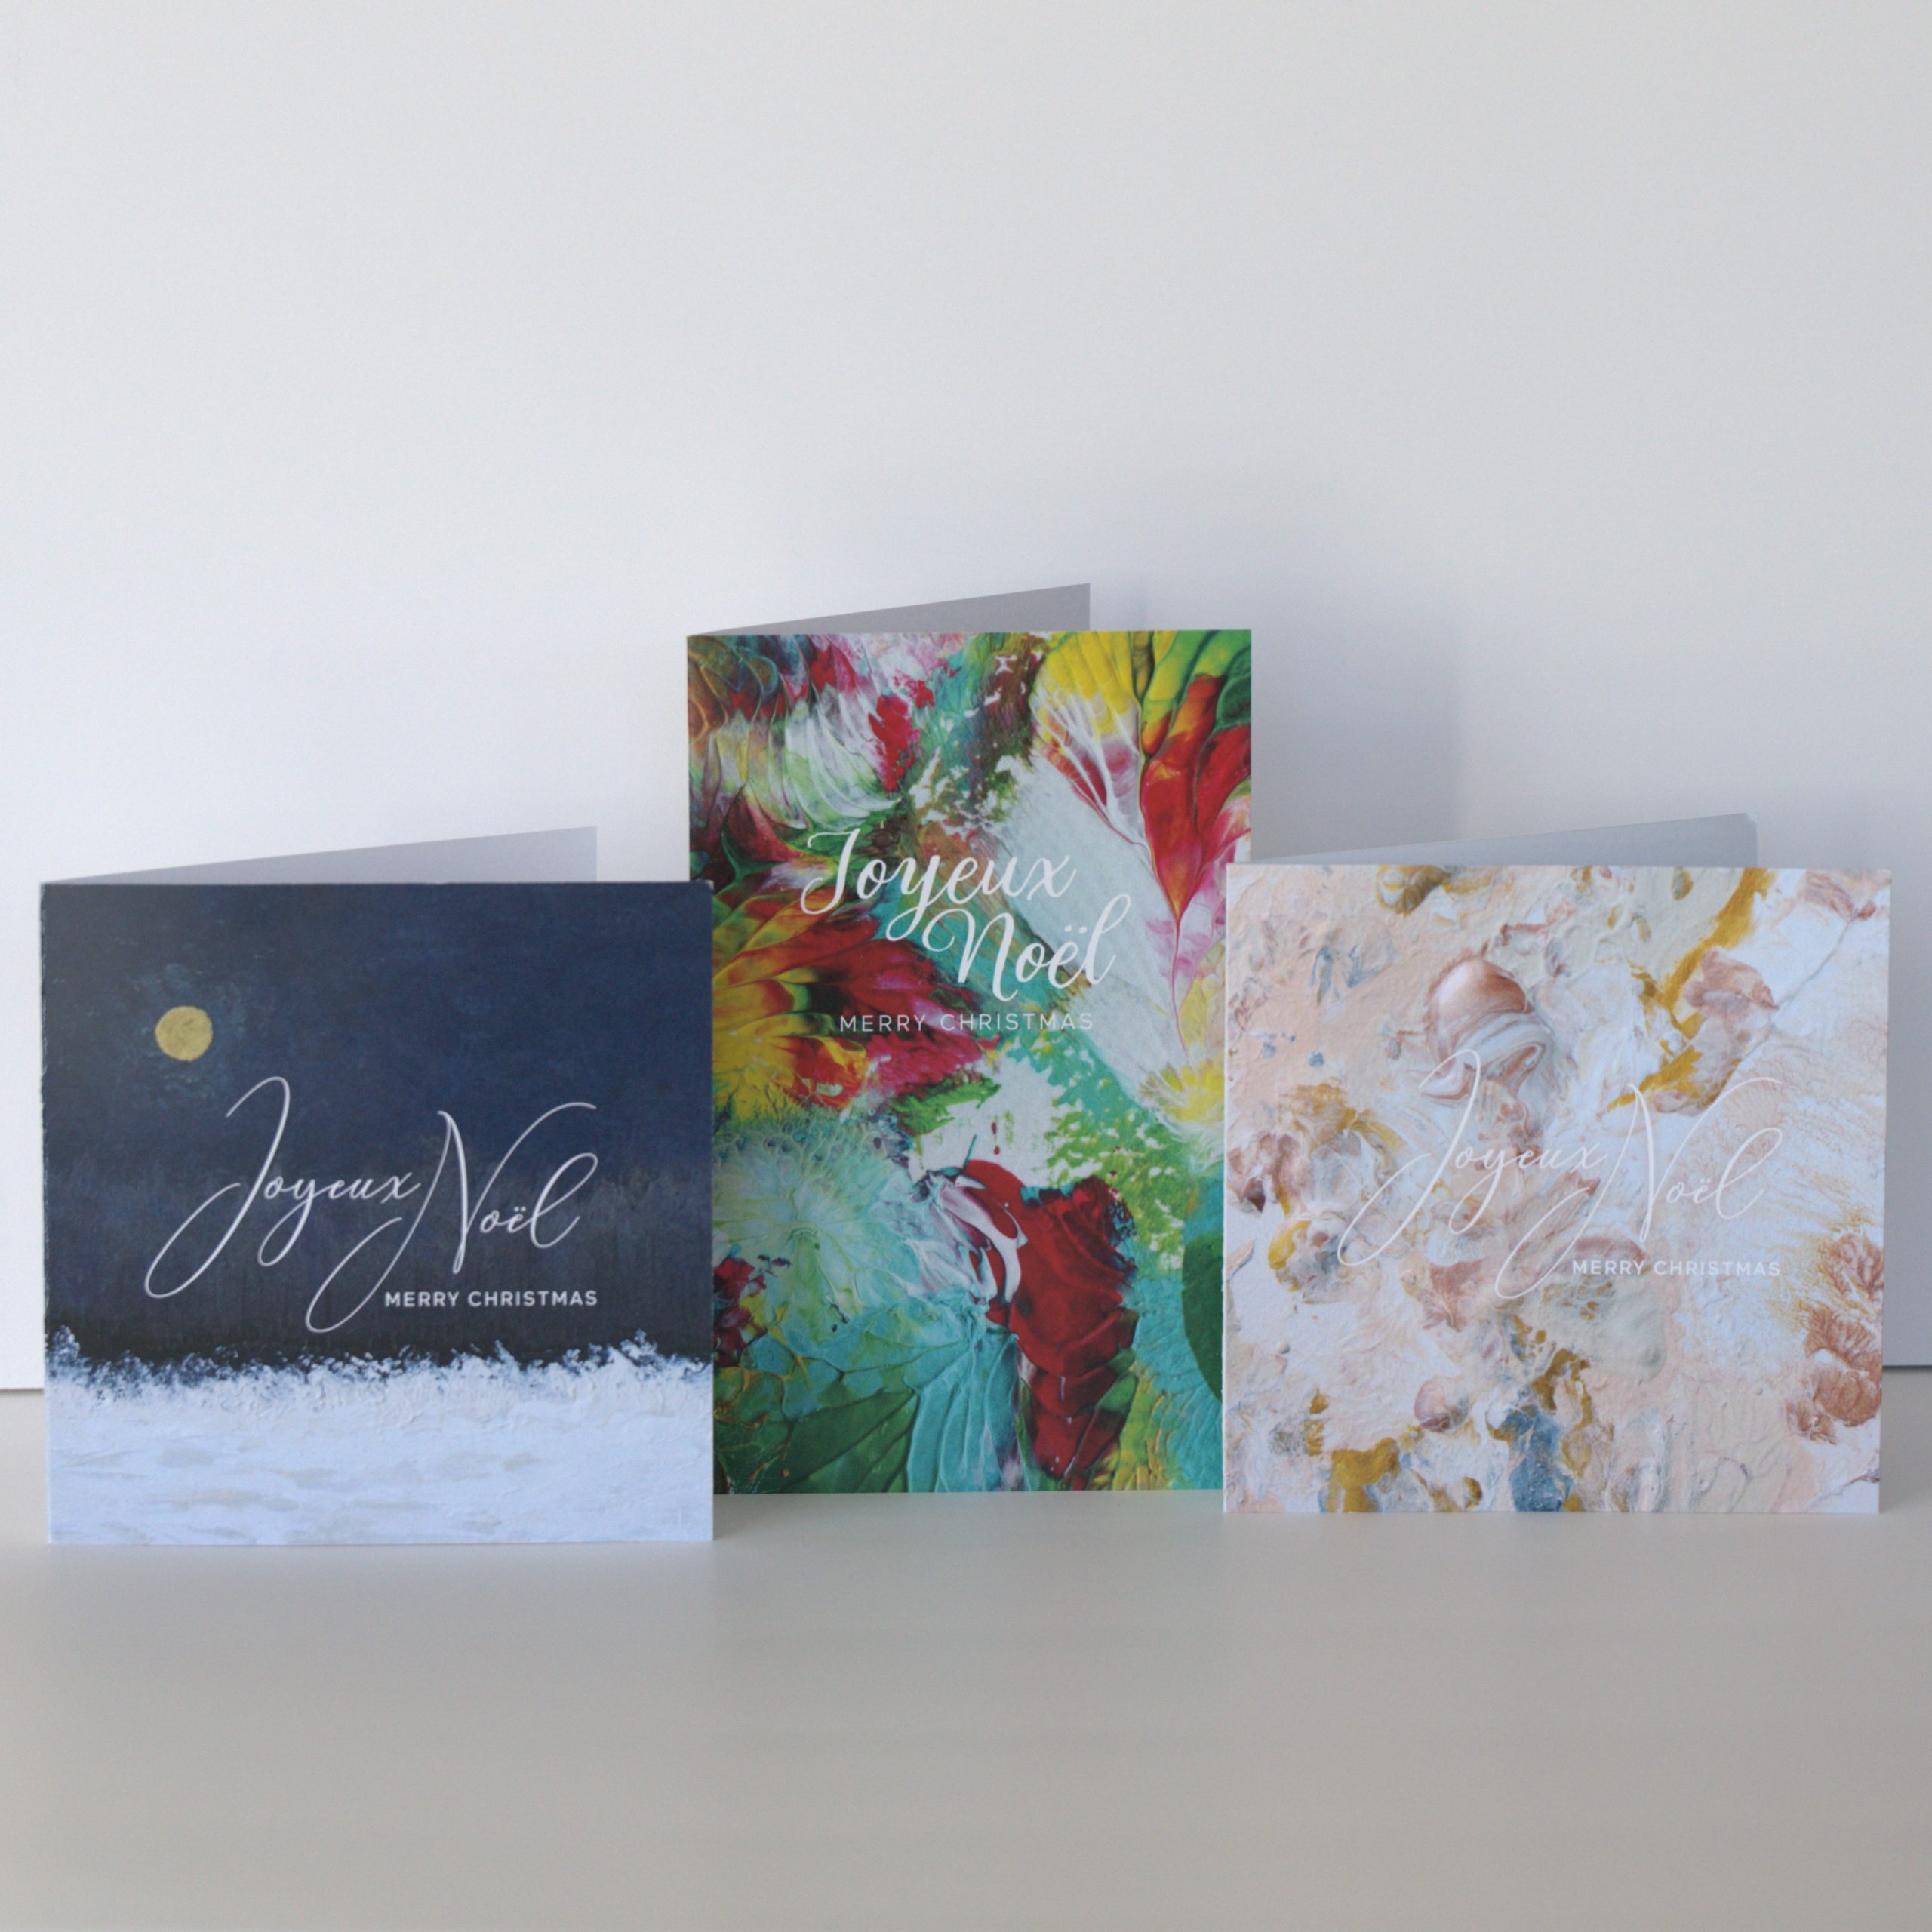 Pack of 12 assorted Christmas cards